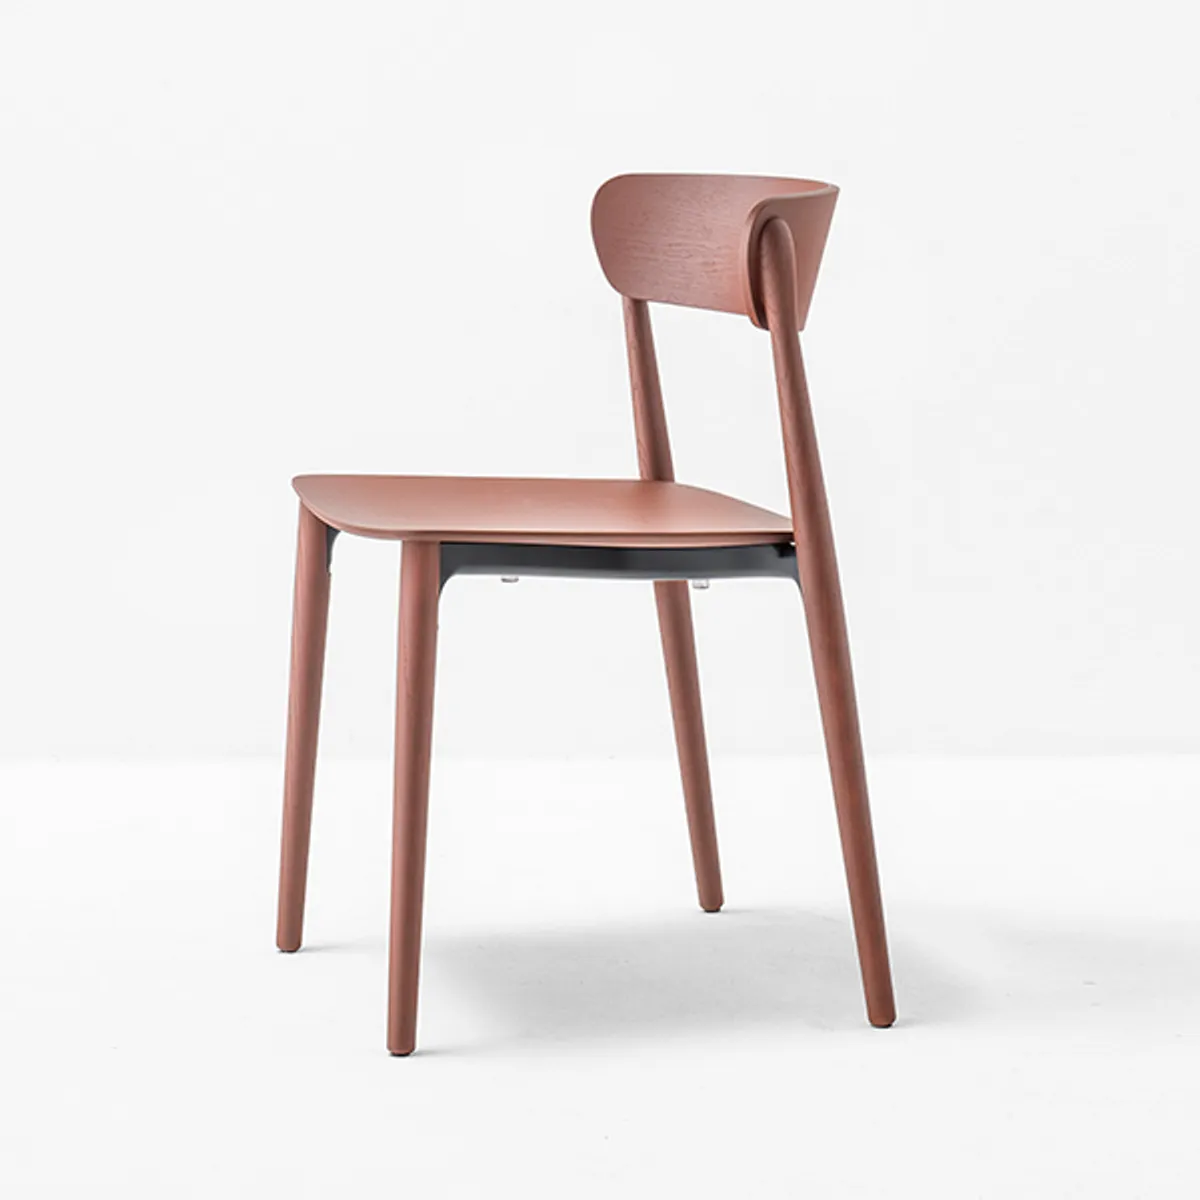 Nemea Chair 2820 Ashwood 09 Inside Out Contracts